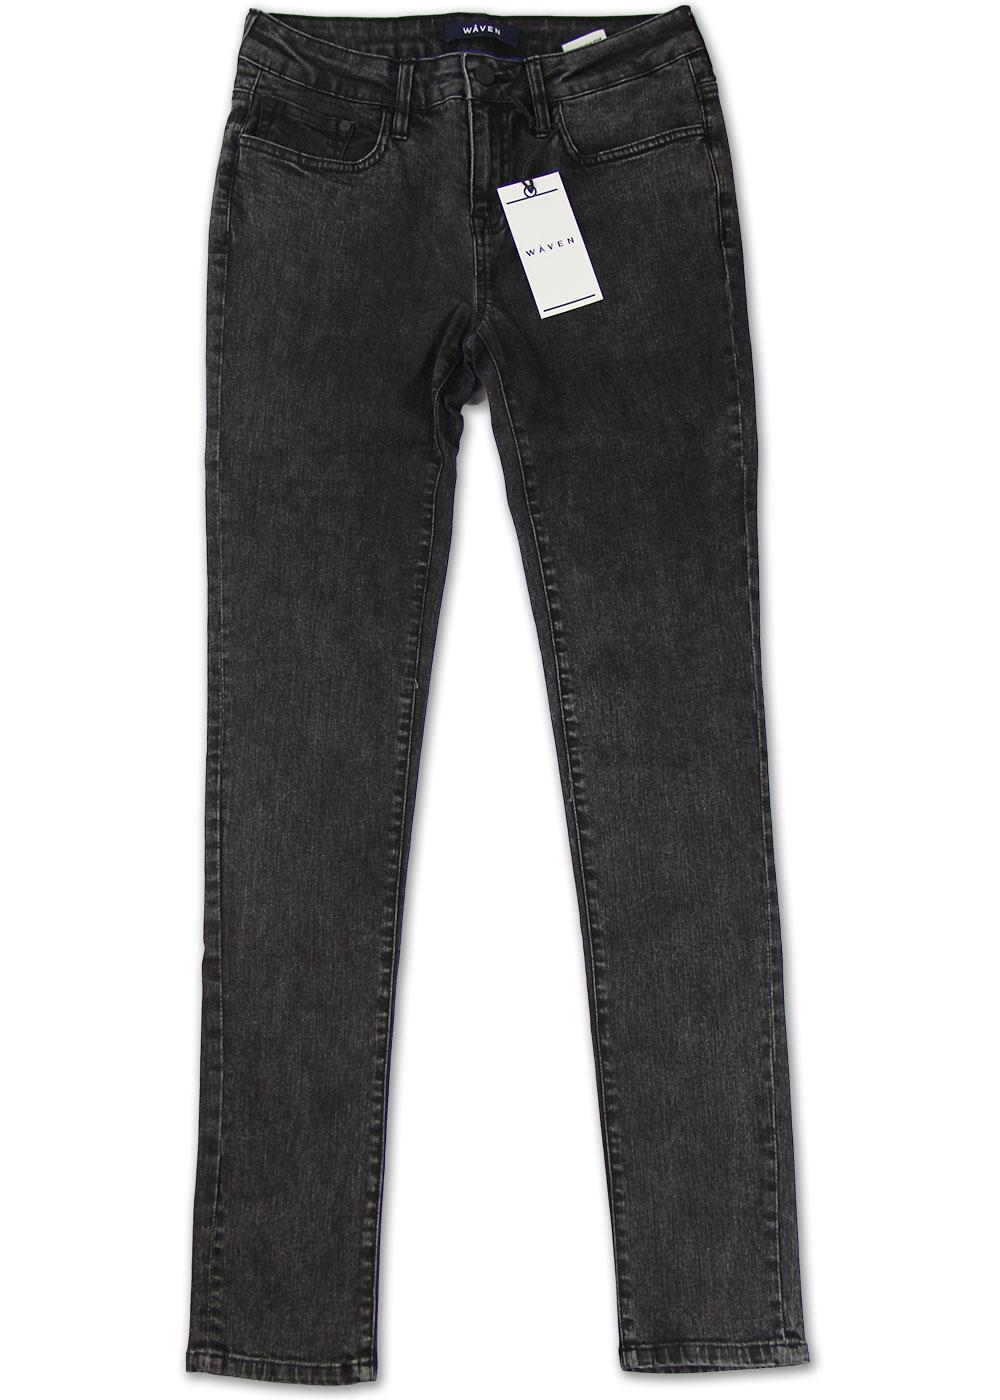 Erling WAVEN Retro Indie Mod Drainpipe Jeans AWB 